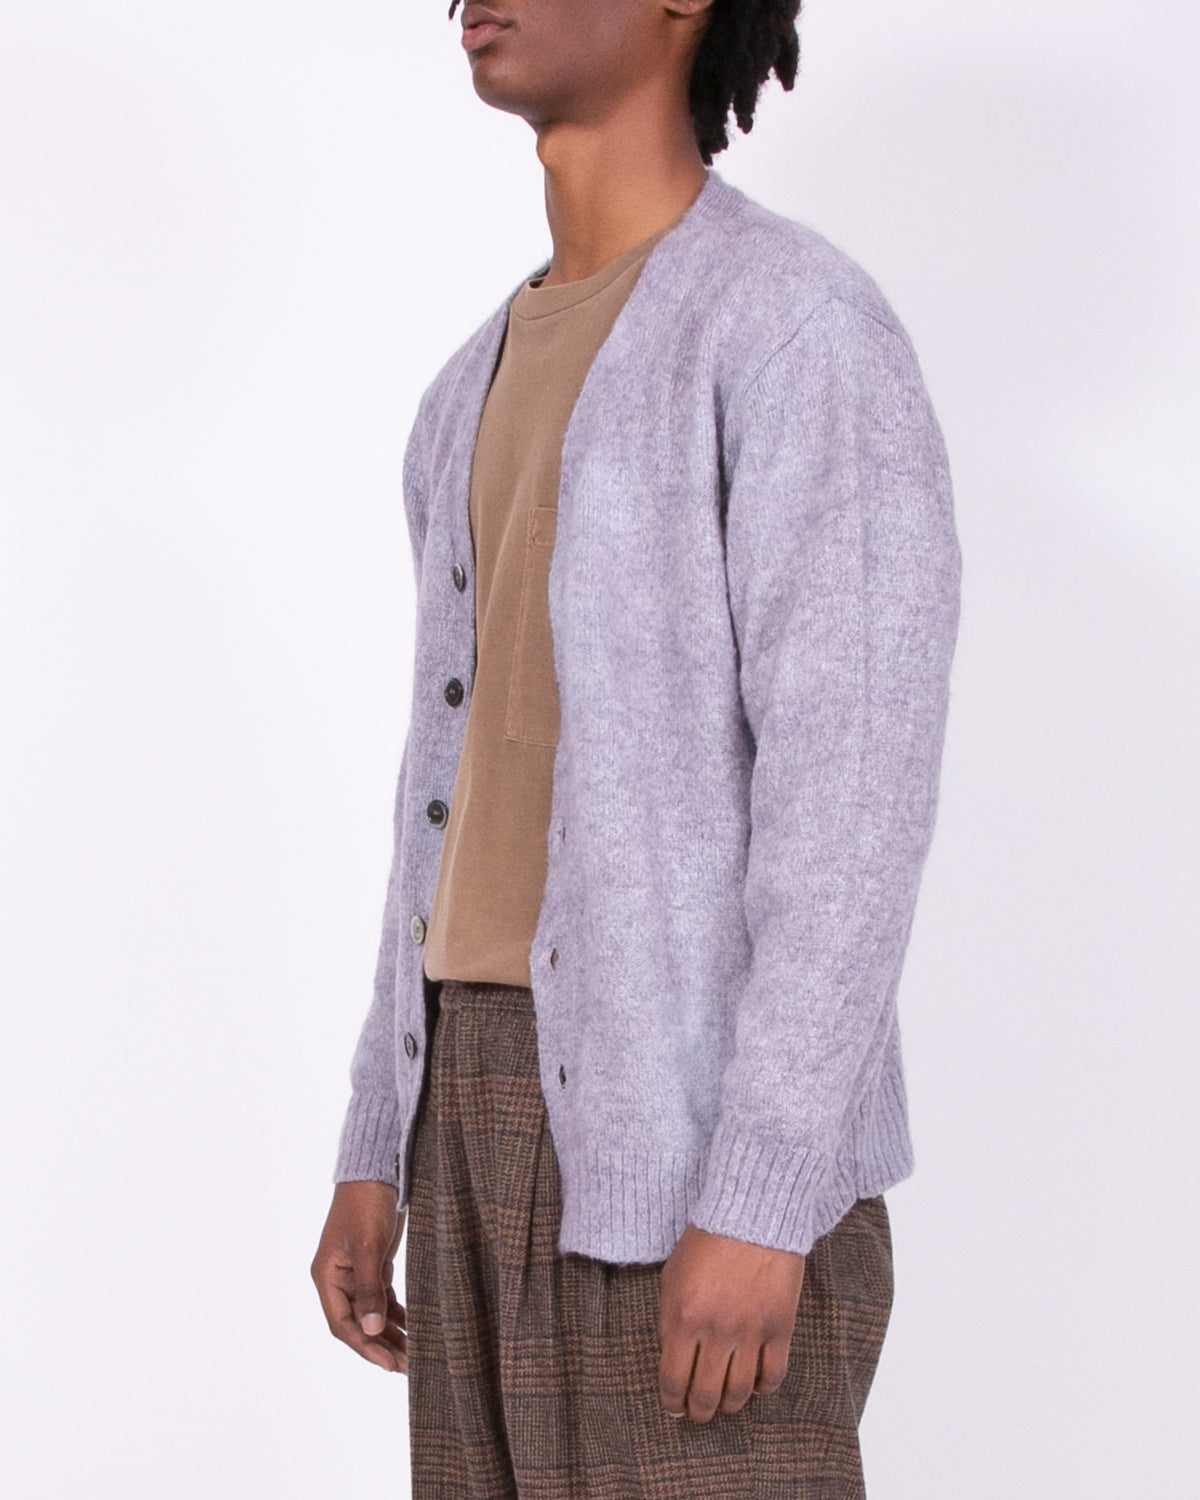 Maiden Noir Mohair Dyed Cardigan - Purple Ash Dyed